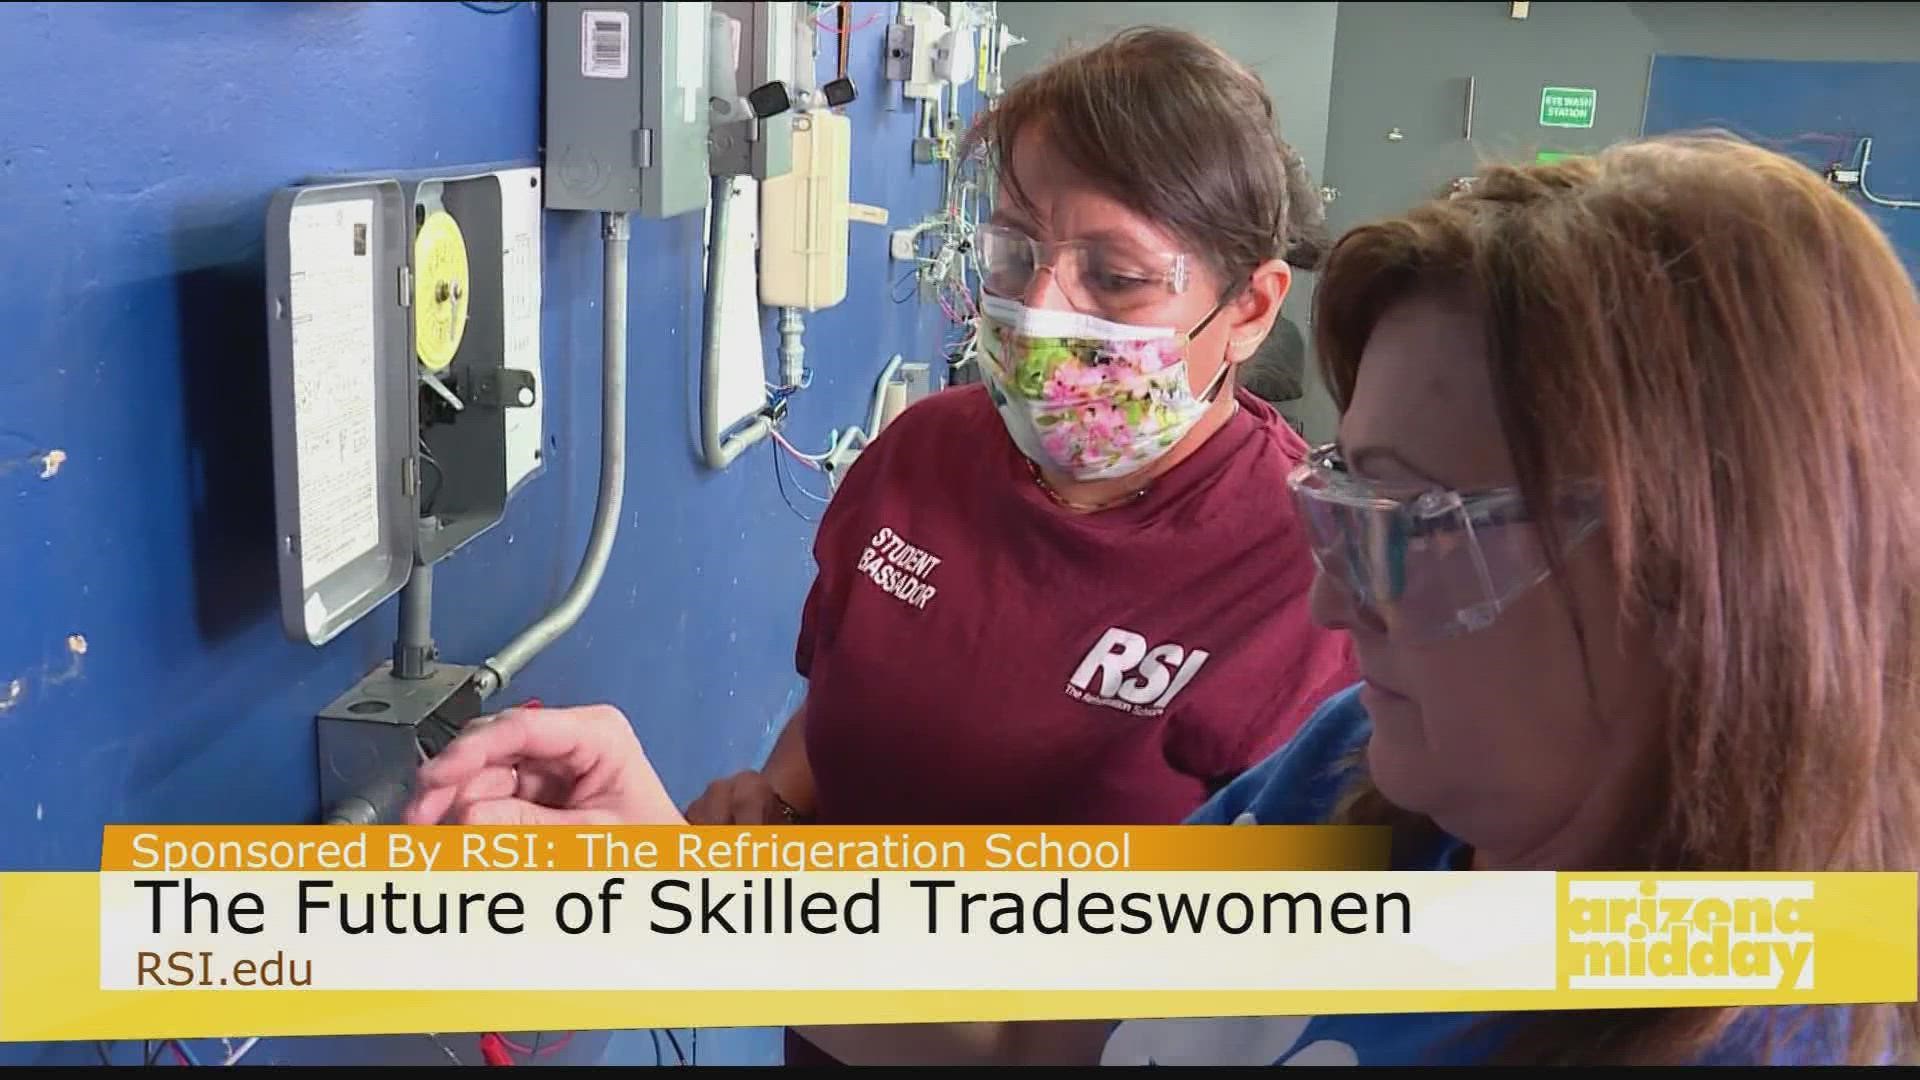 Three women share what led them to seek out RSI to learn skilled trades like HVAC, electrical and welding. Susan Connelly offers advice to women considering trades.